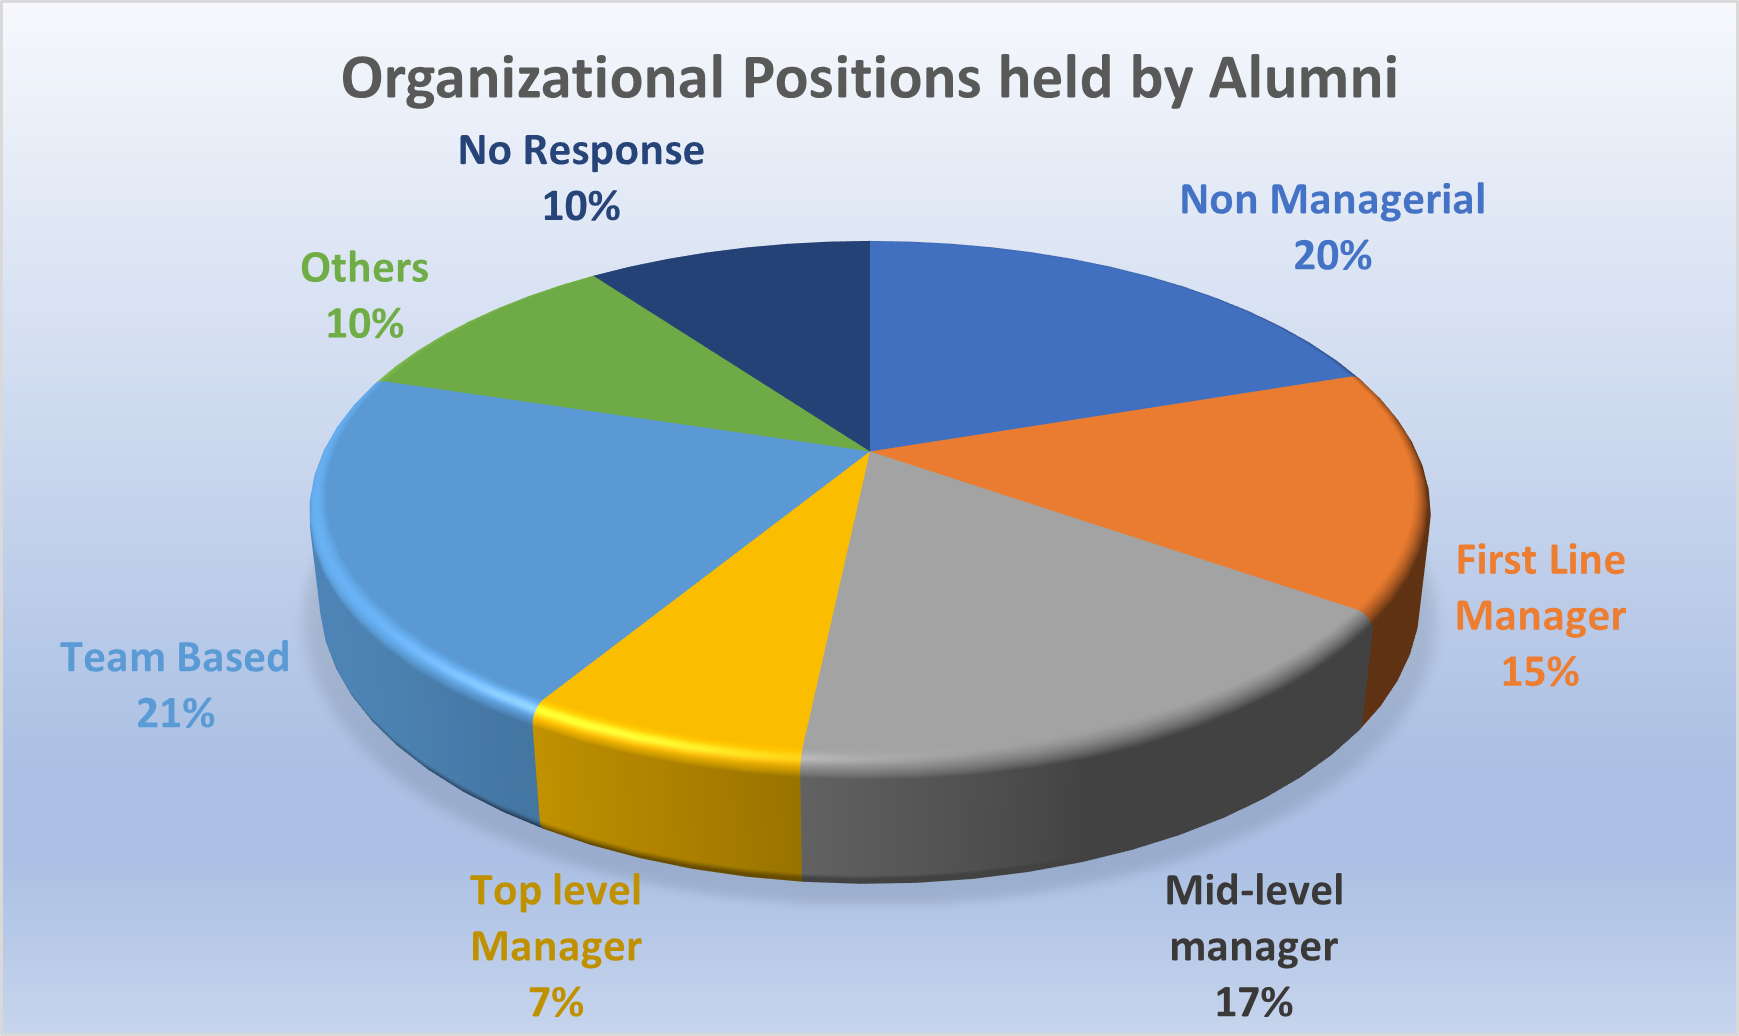 organizational positions held by alumni across five categories. The largest slice, representing 21%, is labelled “Team Based”. The next largest slice is “Mid-level manager”, at 17%. The other three slices are “First line manager” (15%), “Top level manager” (7%), and “Non-managerial/Other” (10% each)